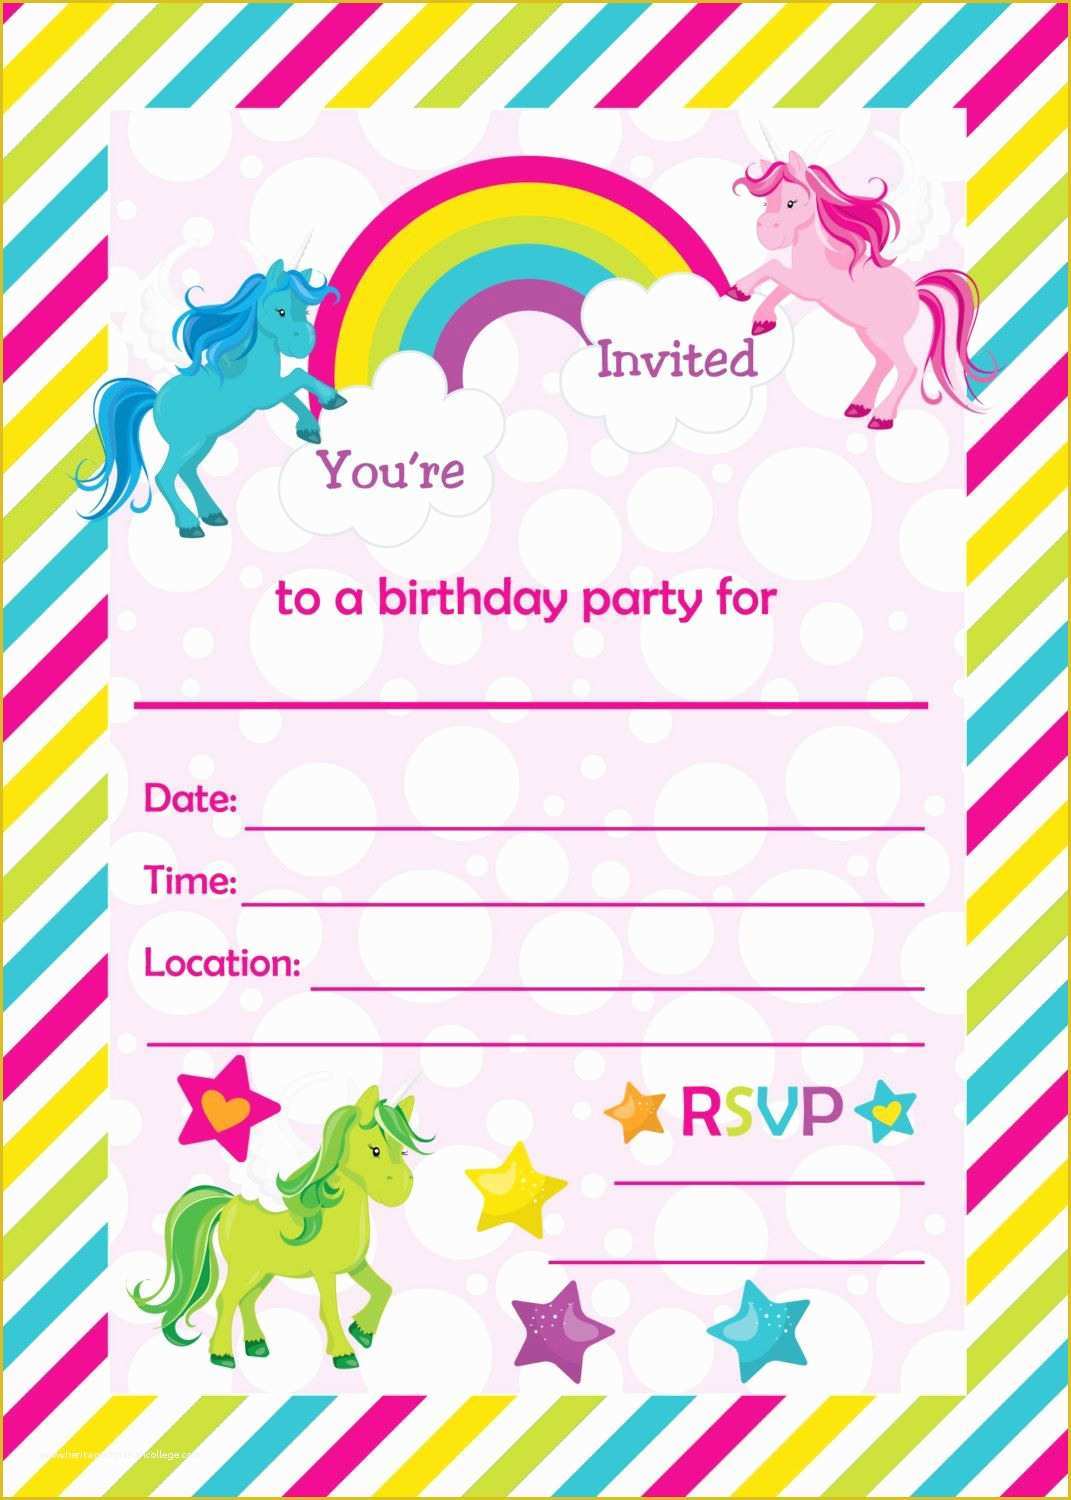 Birthday Party Invitations for Kids Free Templates Of Fill In Birthday Party Invitations Printable Rainbows and